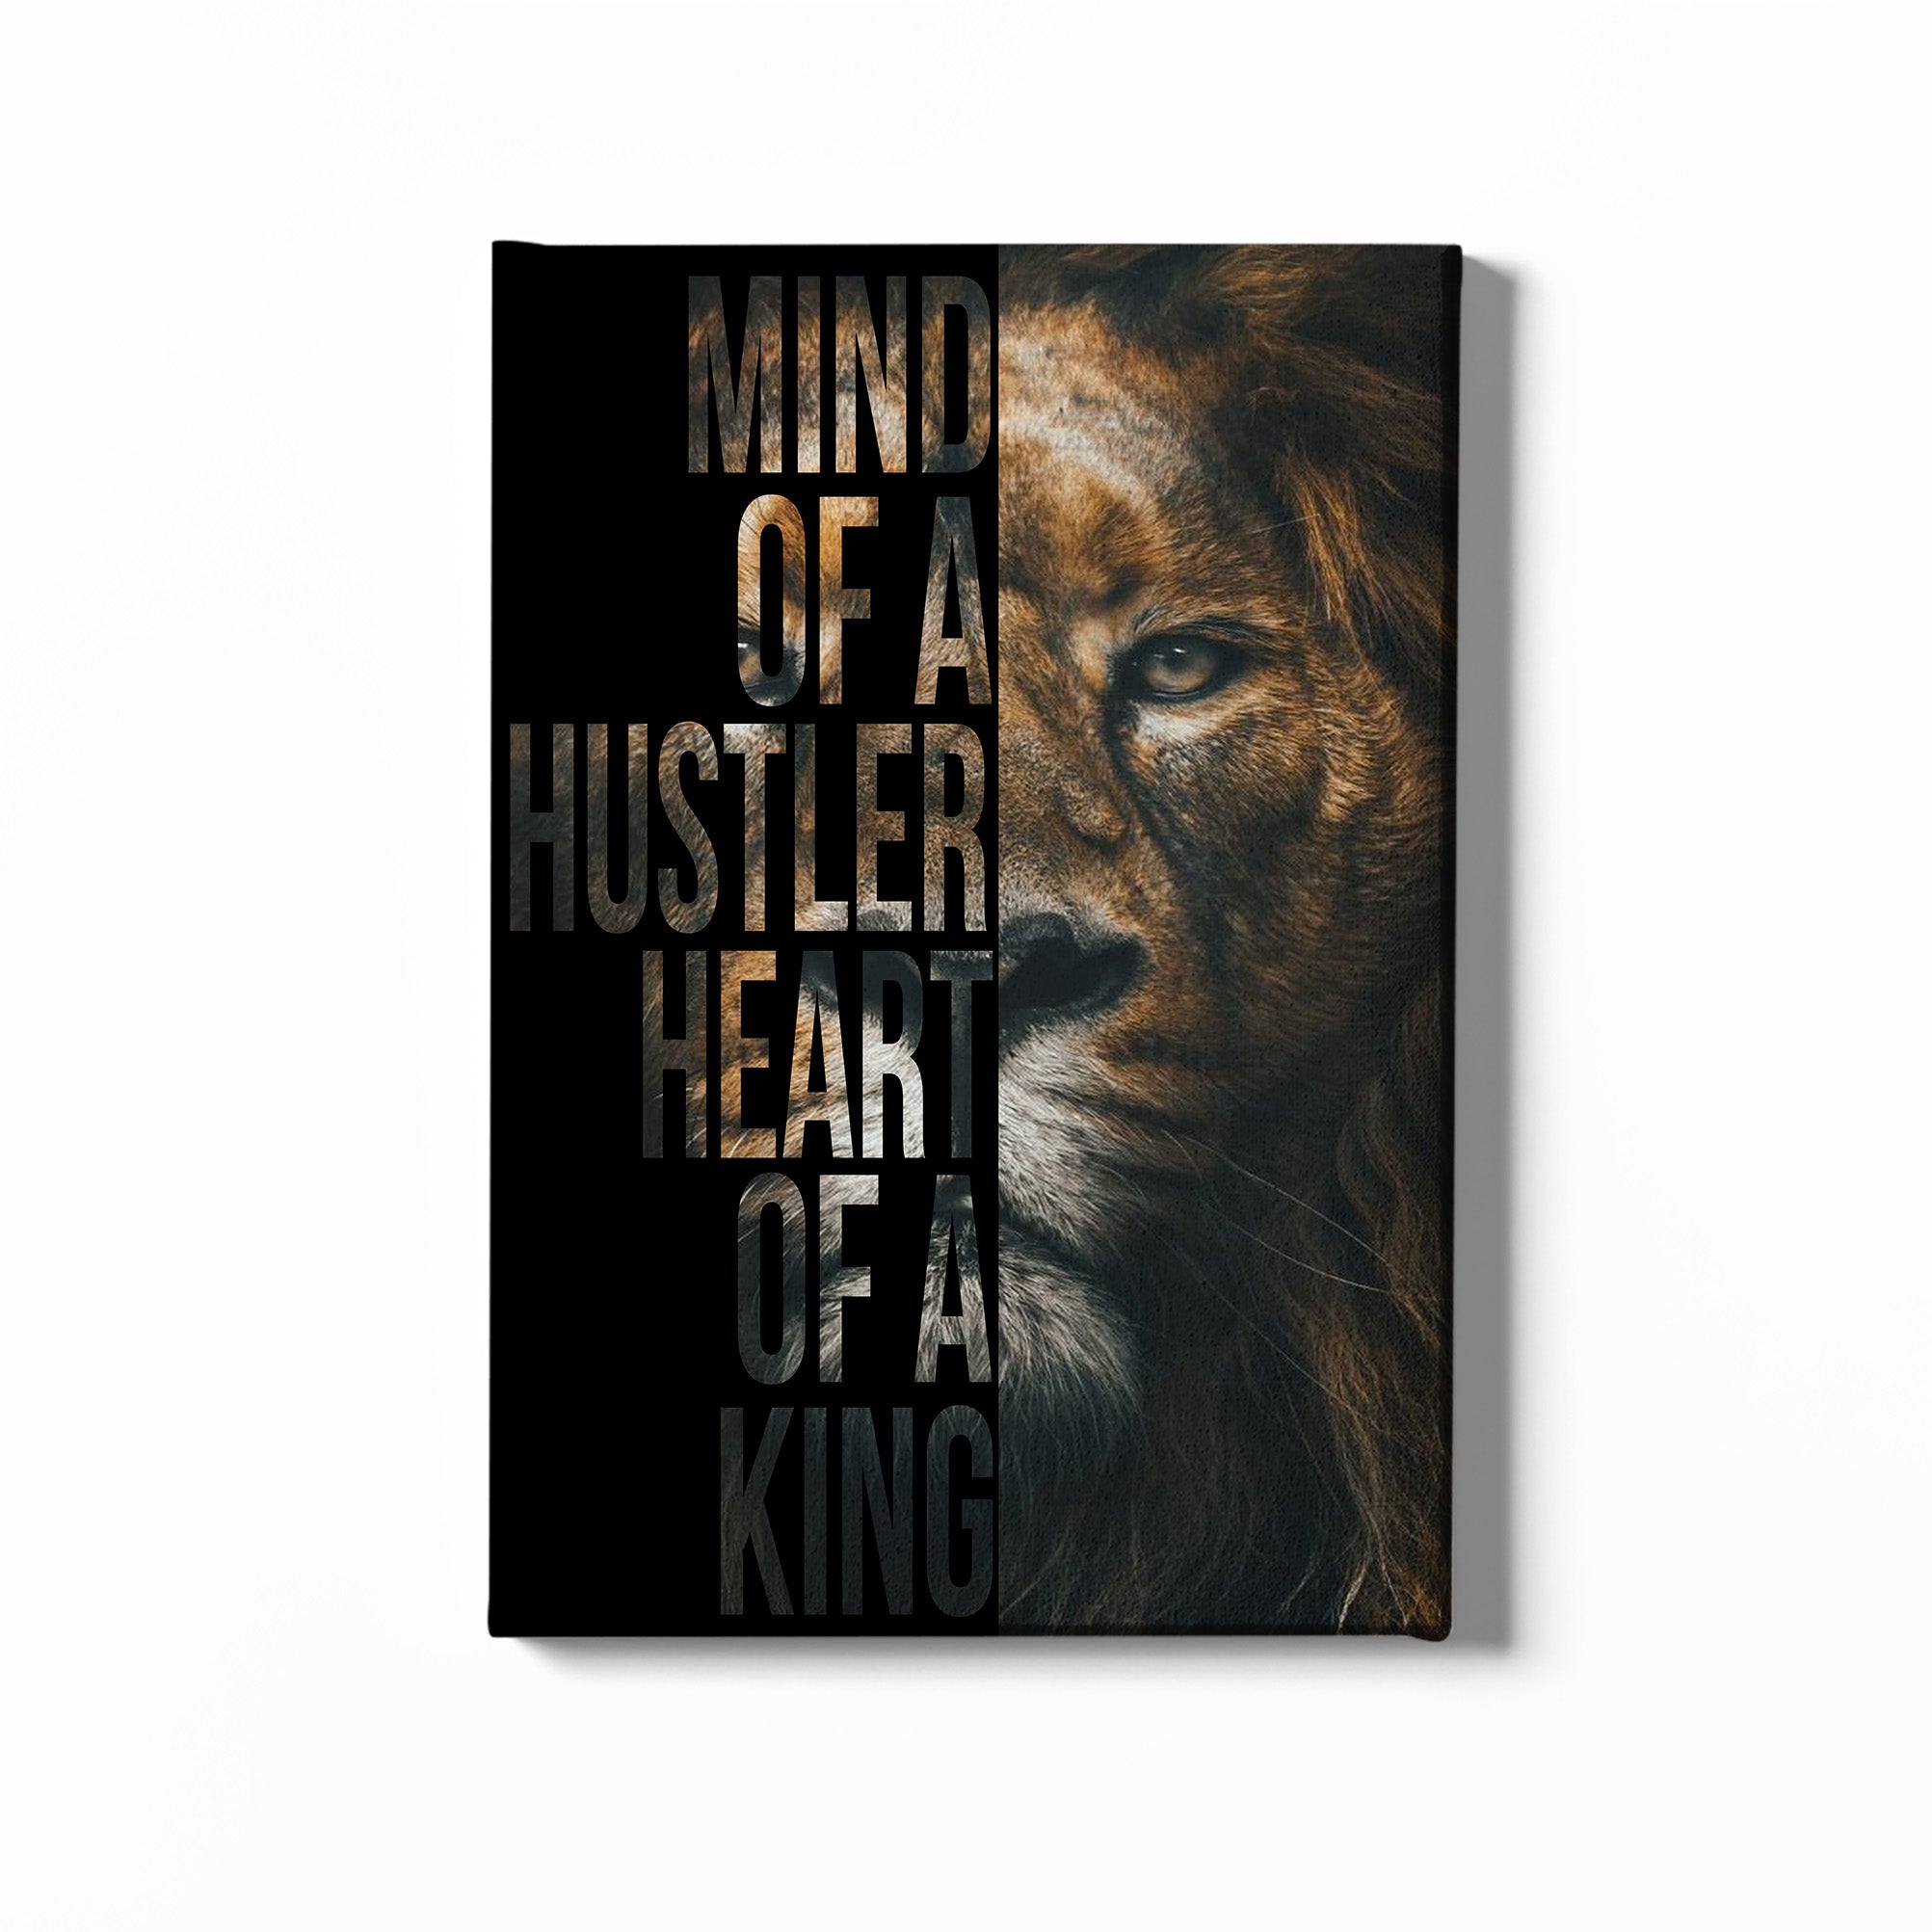 Poster Wall, Mind Of A Hustler Heart Of A Queen Poster, Lion King Quotes, Birthday Gifts For Boyfriend, Living Room Decorations